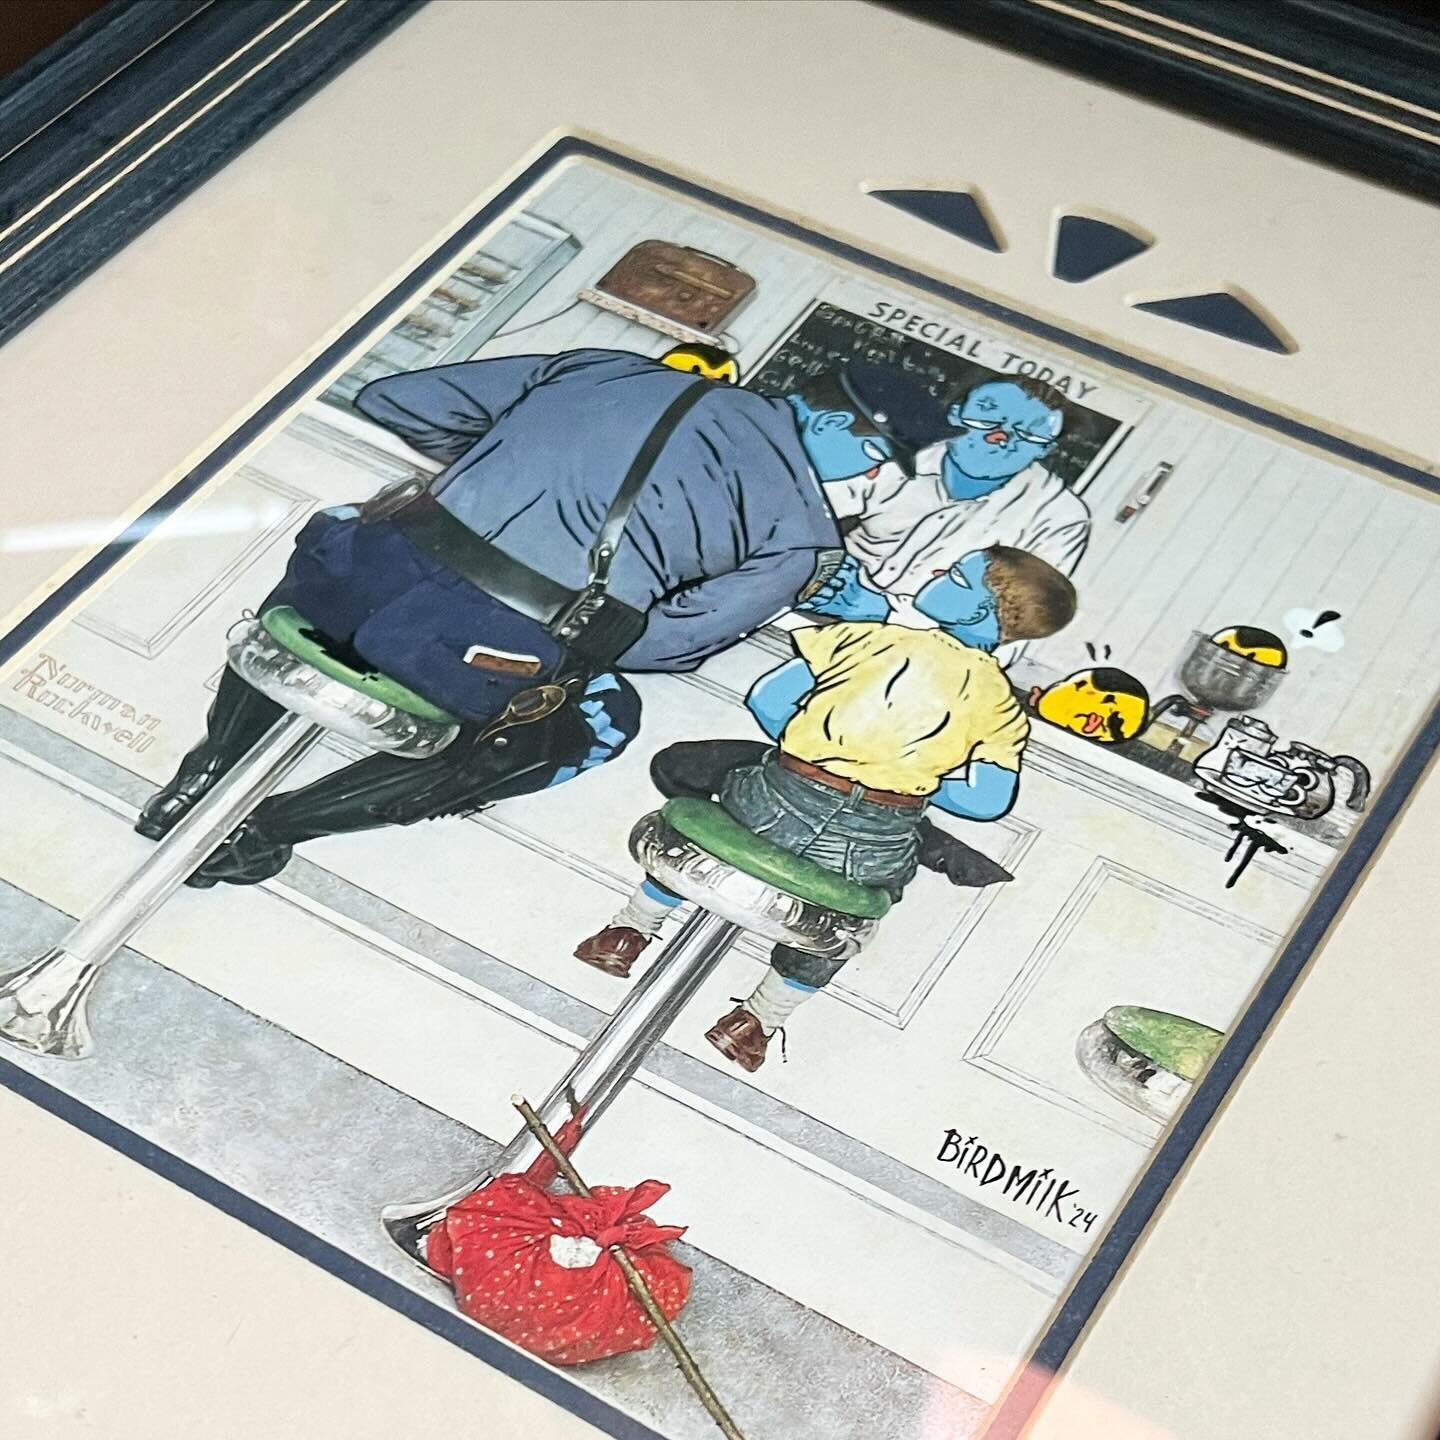 &ldquo;The runaway&rdquo; piggybacked a Norman Rockwell piece for an awesome art show last night hosted by @sickfisher at @emptybottle the piece sold last night so thank you to the buyer and everyone who came to check it out! 
.
#birdmilk #chicago #a